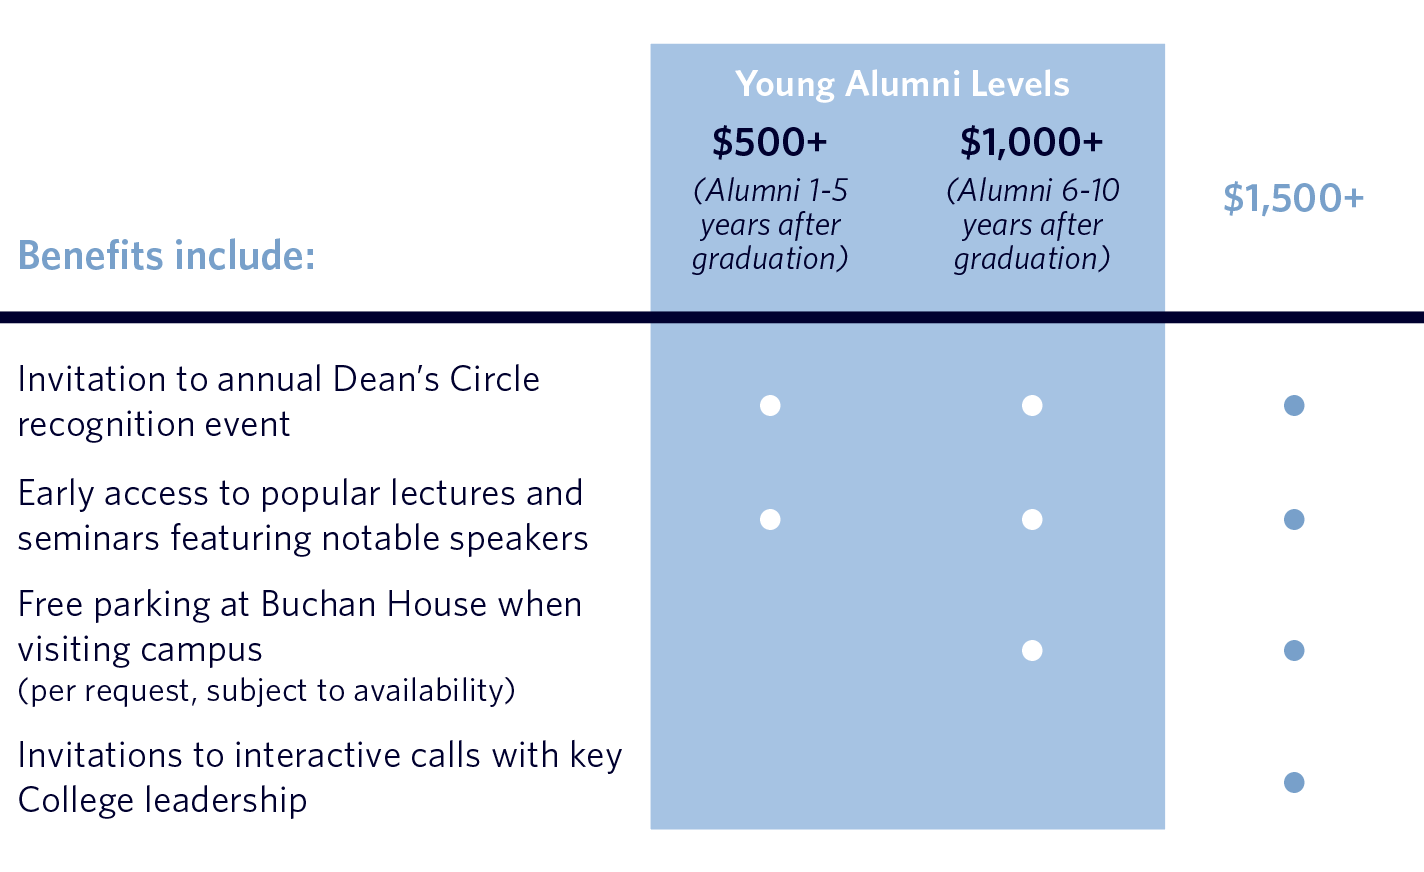 Benefits include: Invitation to annual Dean's Circle recognition event; Early access to popular lectures and seminars featuring notable speakers; Free parking at Buchan House when visiting campus (per request, subject to availability.); Invitations to interactive calls with key College leadership. Young Alumni levels include $500+ for alumni 1-5 years after graduation; $1,000+ for alumni 6-10 years after graduation; and $1,500+.